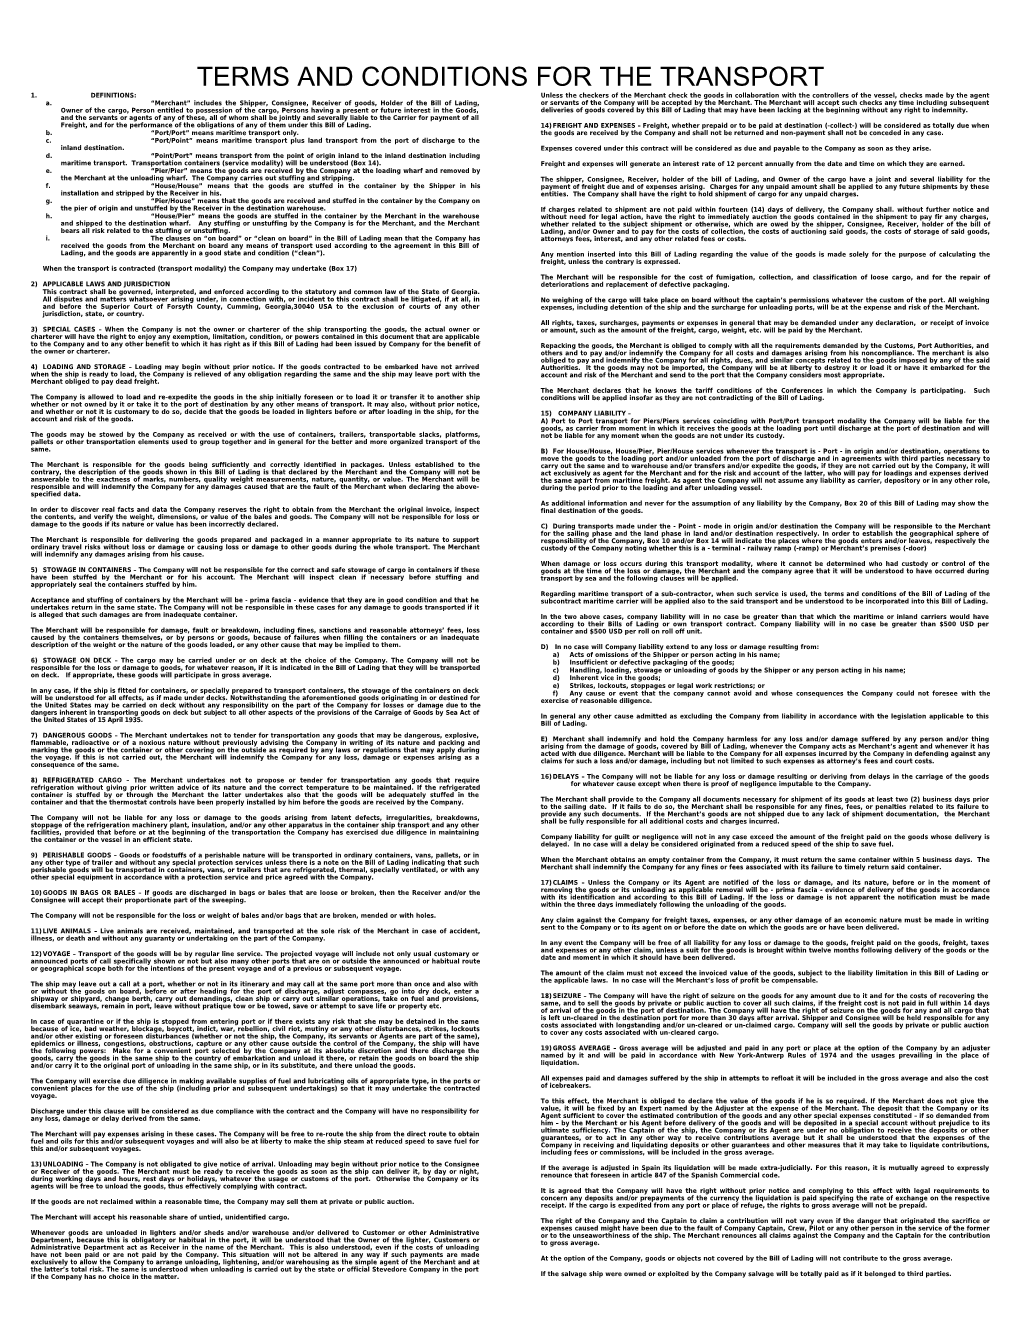 Terms and Conditions for the Transport